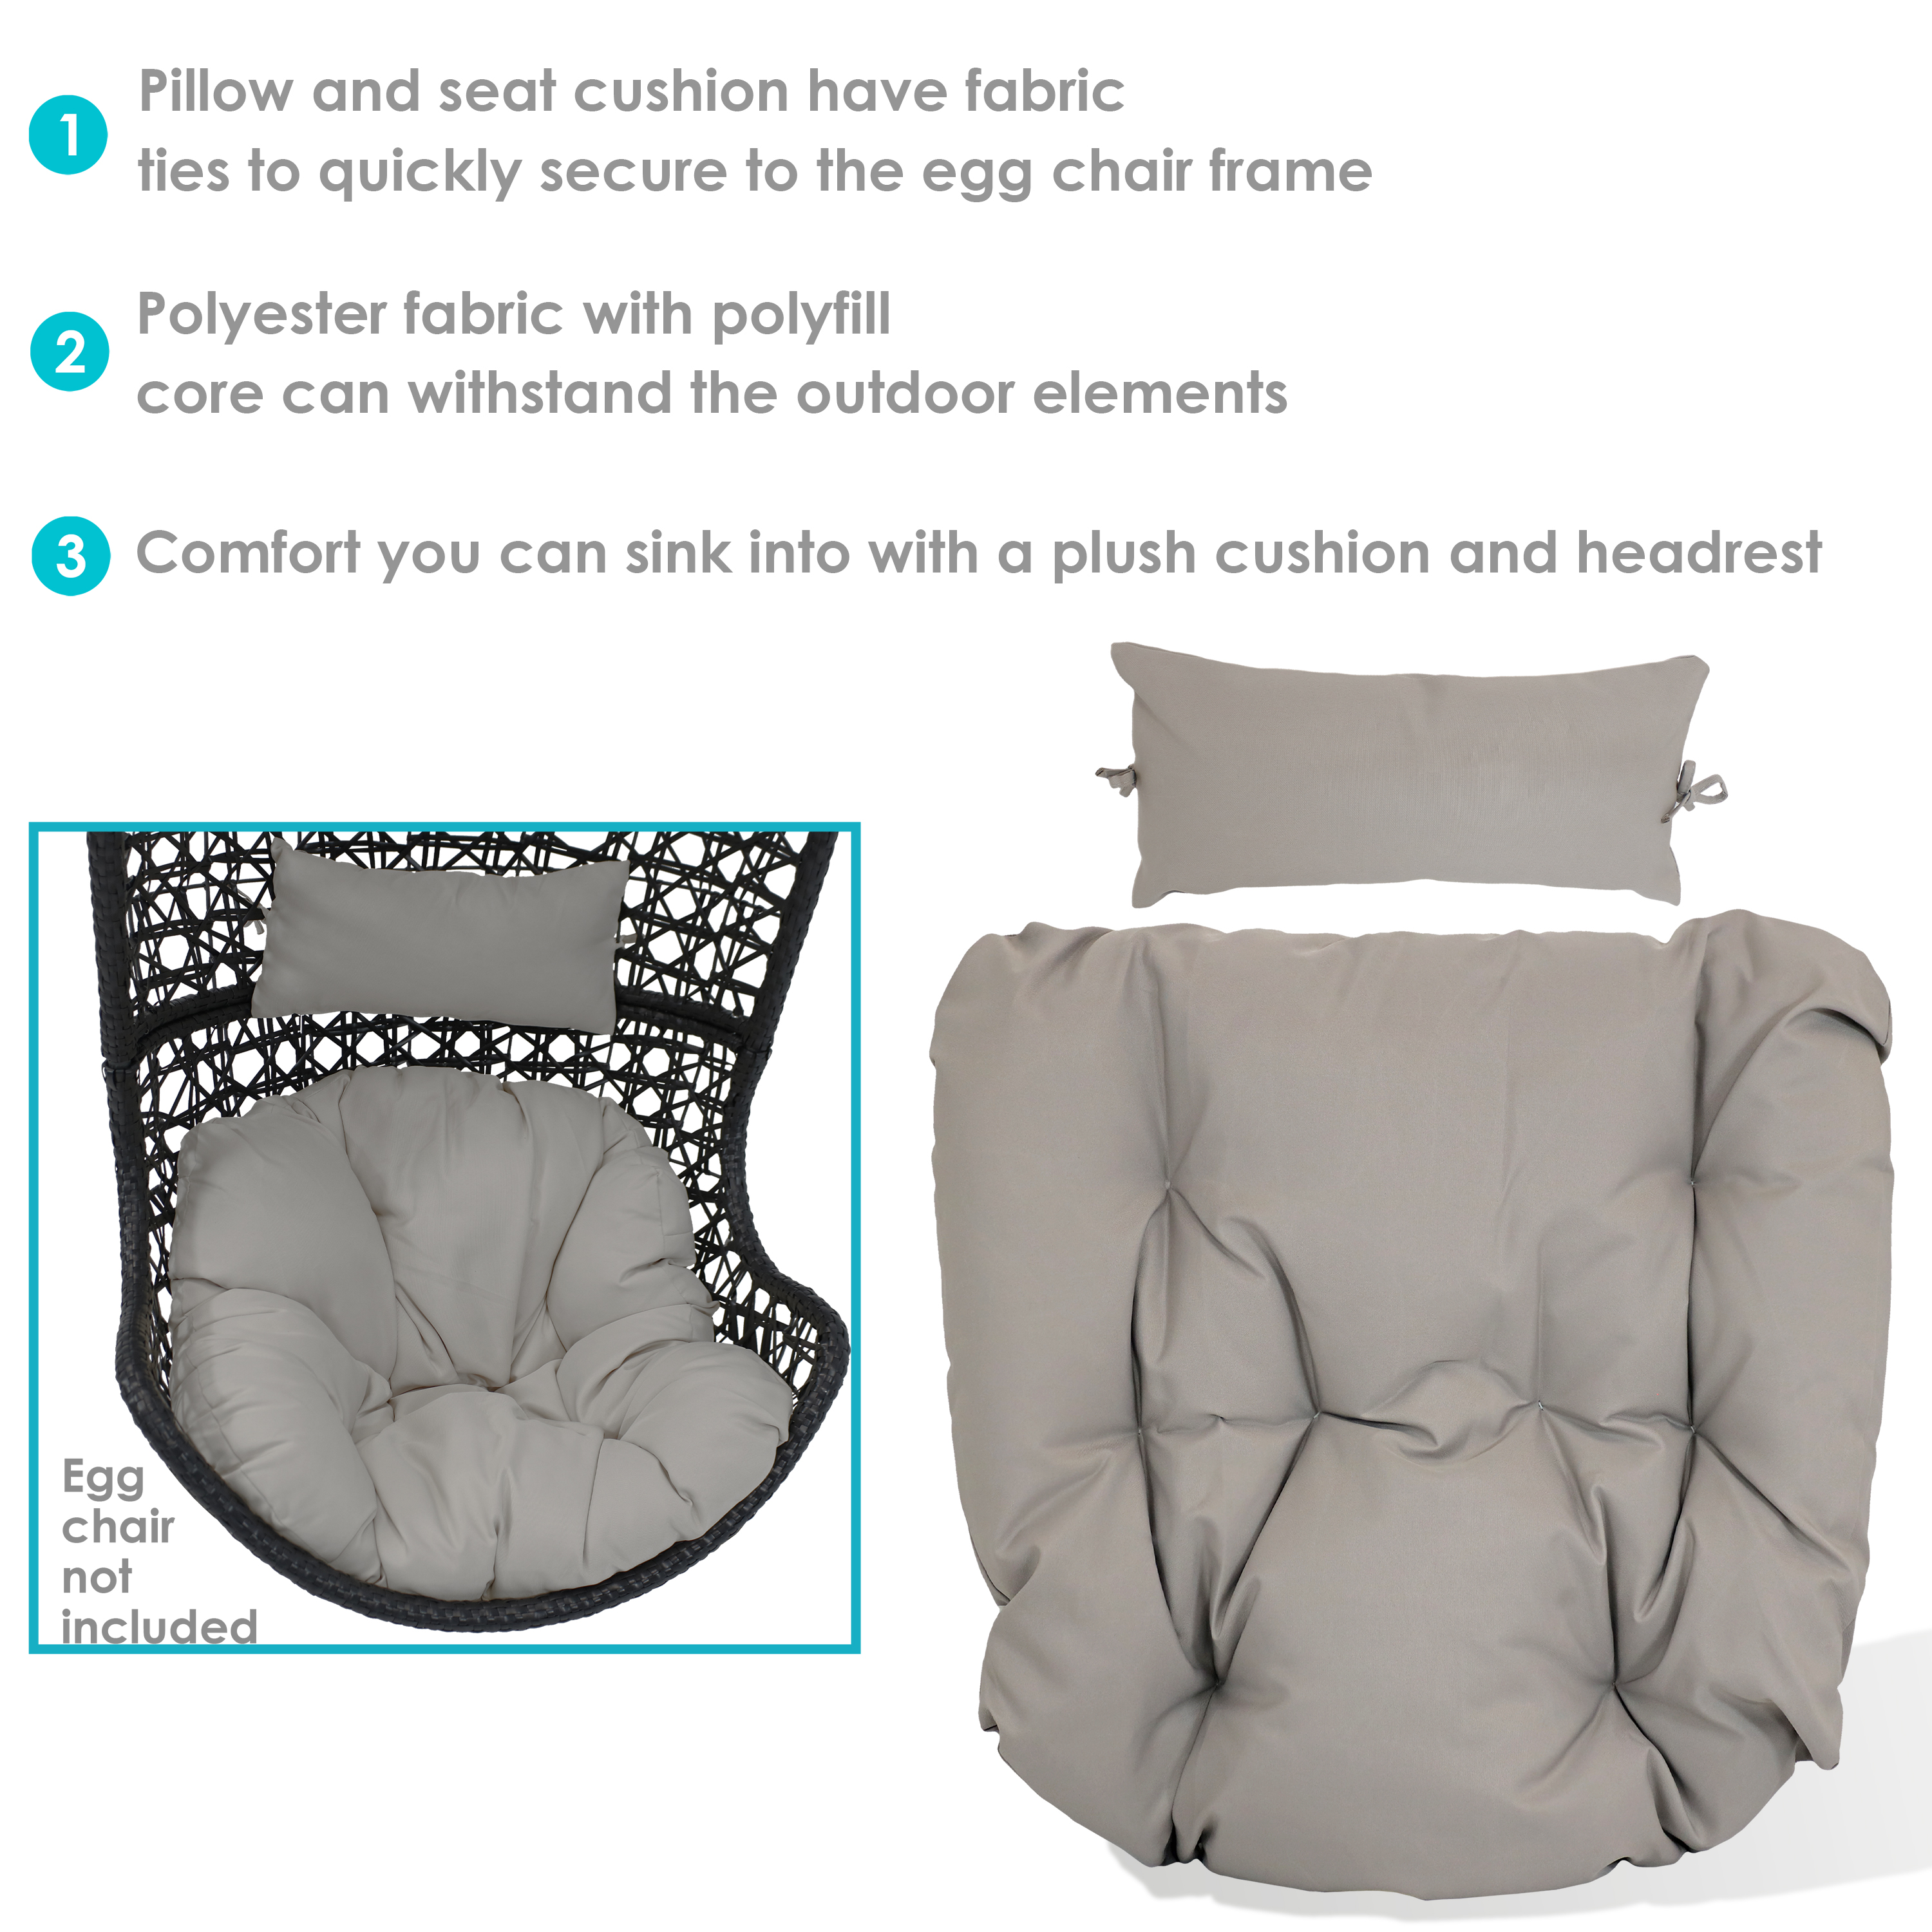 Sunnydaze Replacement Seat Cushion and Headrest Pillow for Caroline Egg Chair - Gray - image 4 of 7